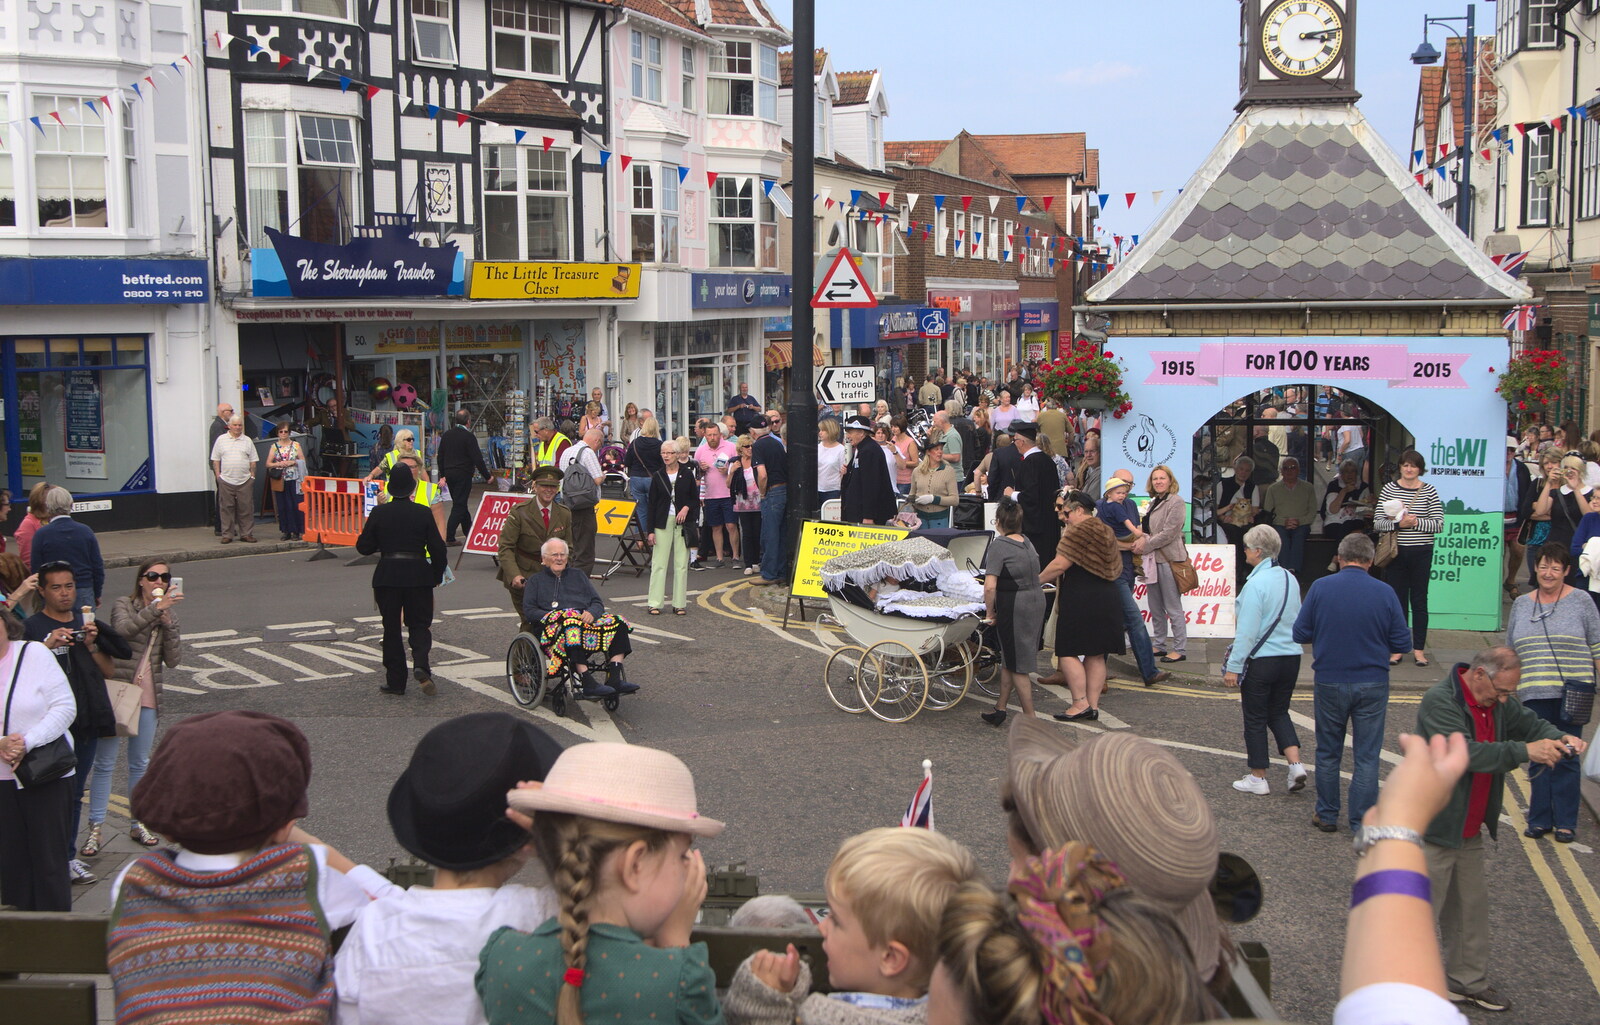 The scene at the top of the High Street from A Steamy 1940s Day Out, Holt and Sheringham, Norfolk - 20th September 2015